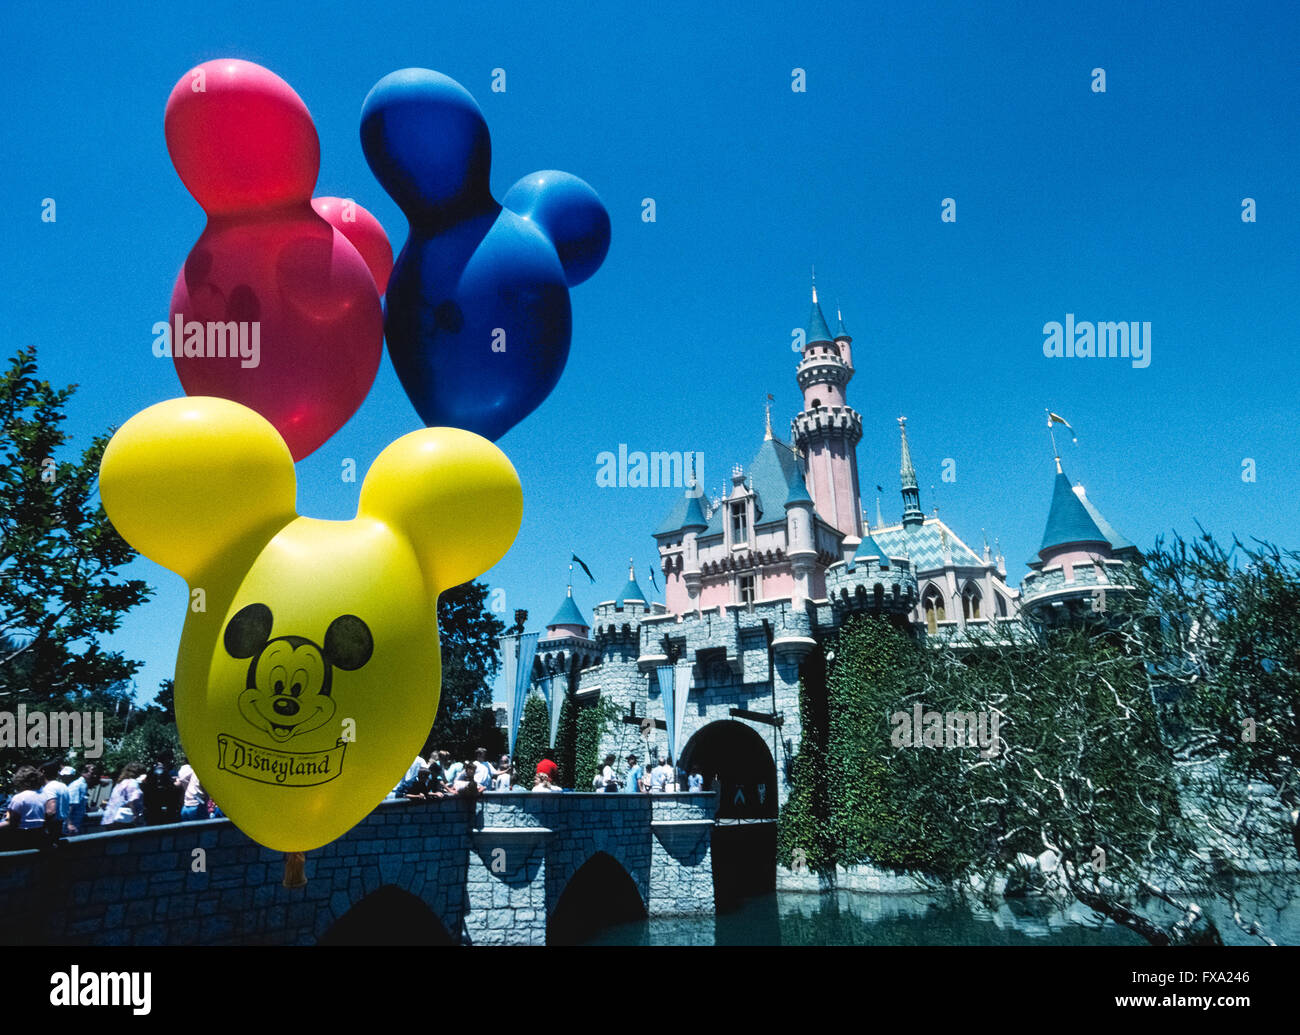 Brightly-colored balloons with the face of Mickey Mouse float in front of Sleeping Beauty Castle, an imposing fairy-tale structure that is the centerpiece of the world’s most famous theme park, Disneyland, which opened in 1955 in Anaheim, California, USA.  The building was modeled after a real castle, Neuschwanstein, constructed in Germany in the late 1800s as a palace for King Ludwig II of Bavaria.  Disneyland was the creation of Walt Disney, a well-known American entrepreneur and filmmaker who created Mickey Mouse and other iconic cartoon characters. Stock Photo